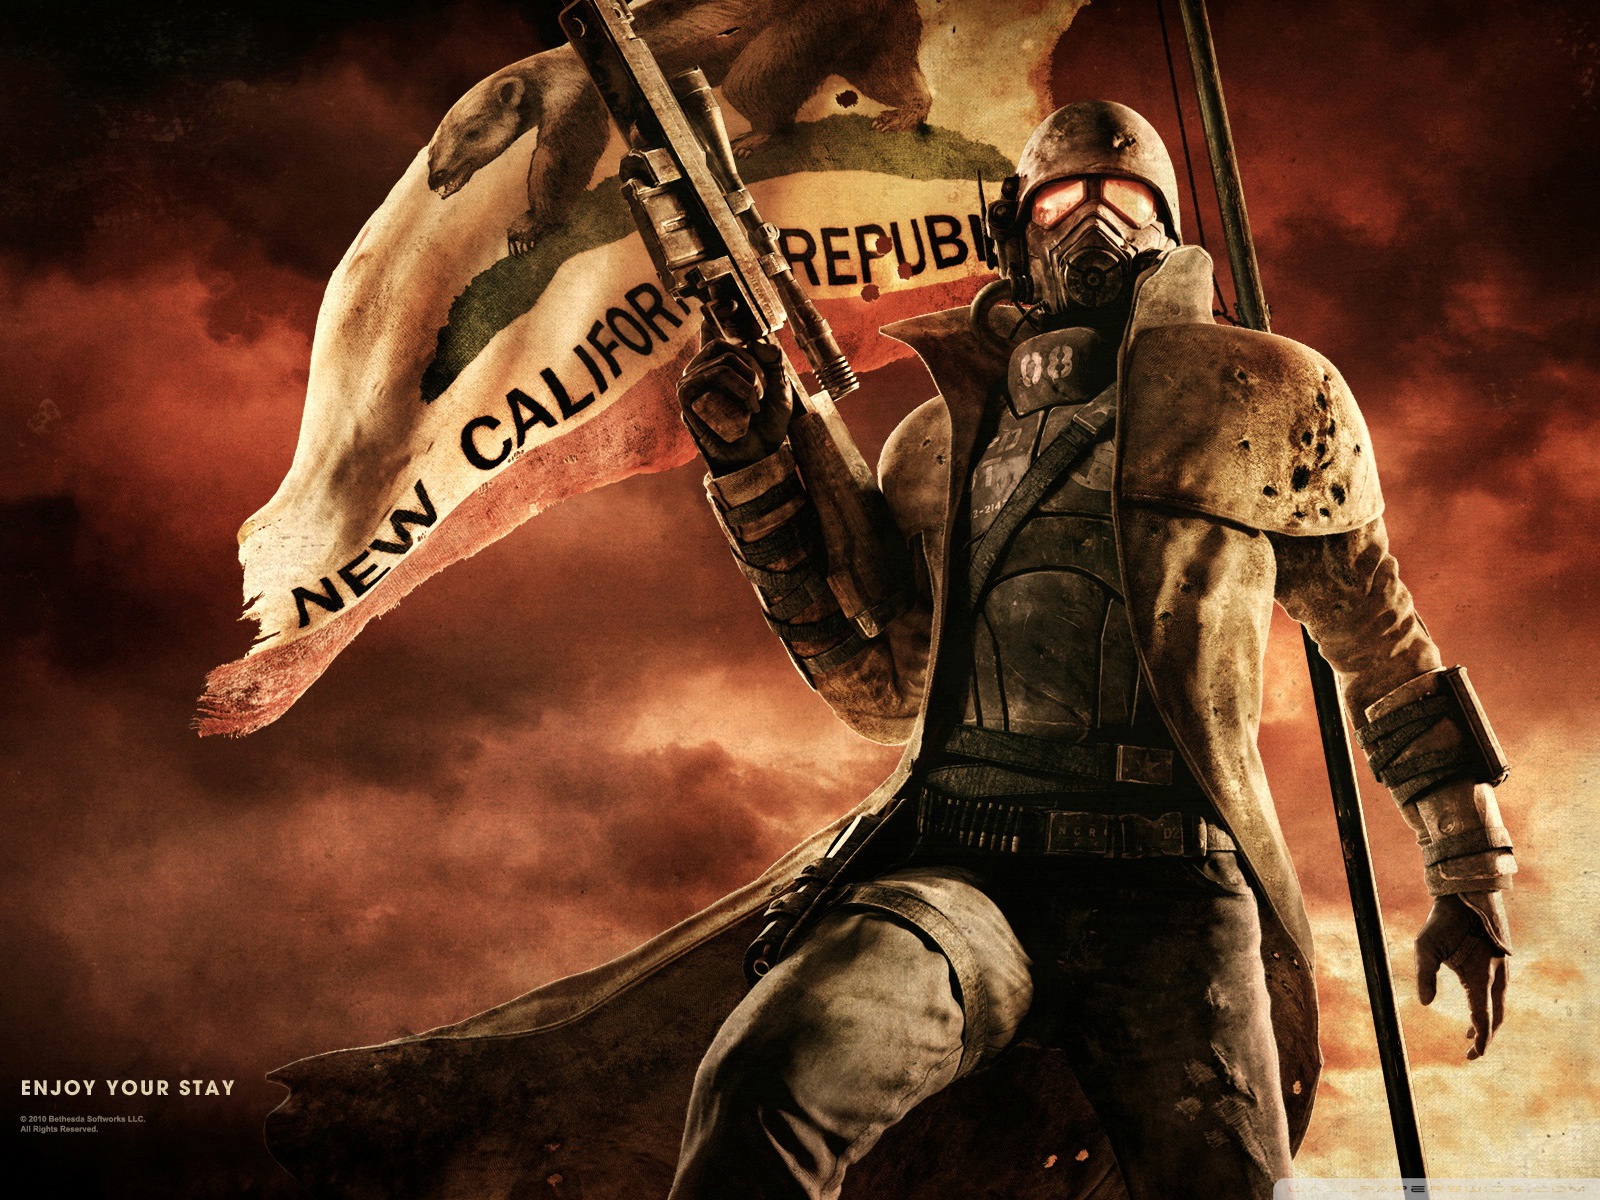 34 Fallout Wallpapers For Your Leisure